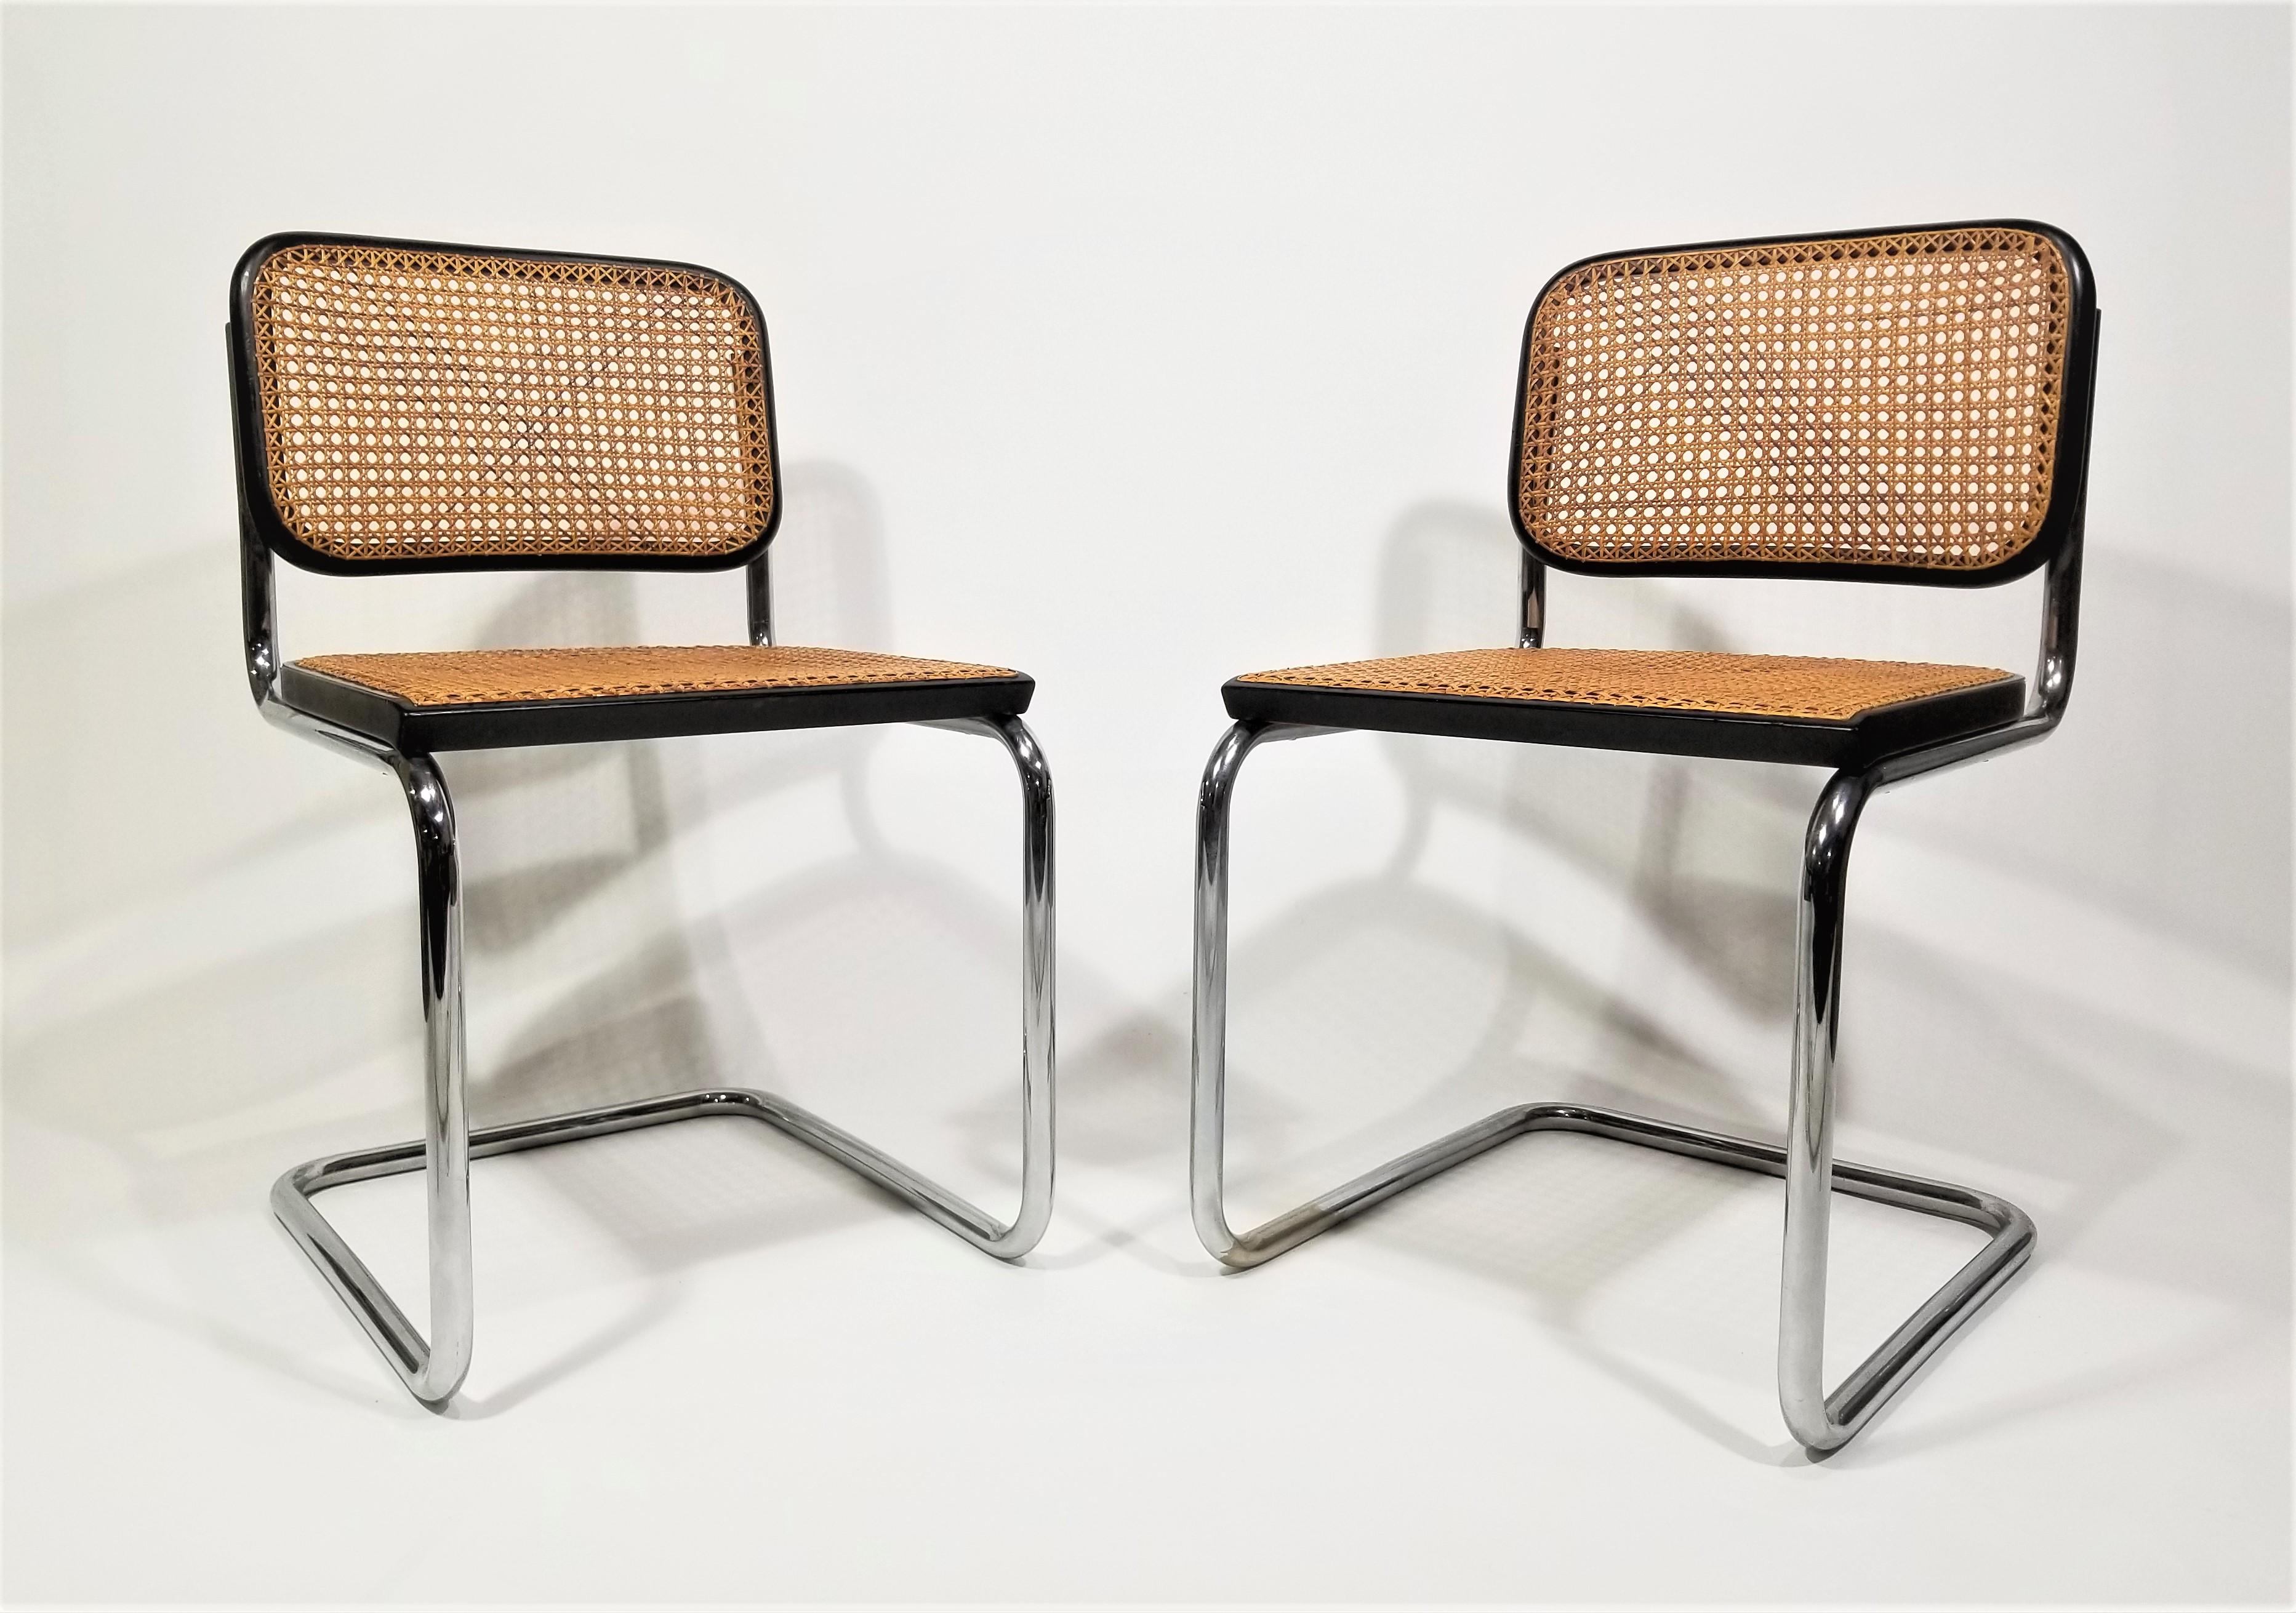 Authentic mid century 1960s Marcel Breuer Cesca side chairs by Stendig. Original markings on back, seat and chrome frame. Black finish. Beautiful hand caned Carmel color cane on seats and backs. Classic cantilever chrome frames. 

Rare to find in